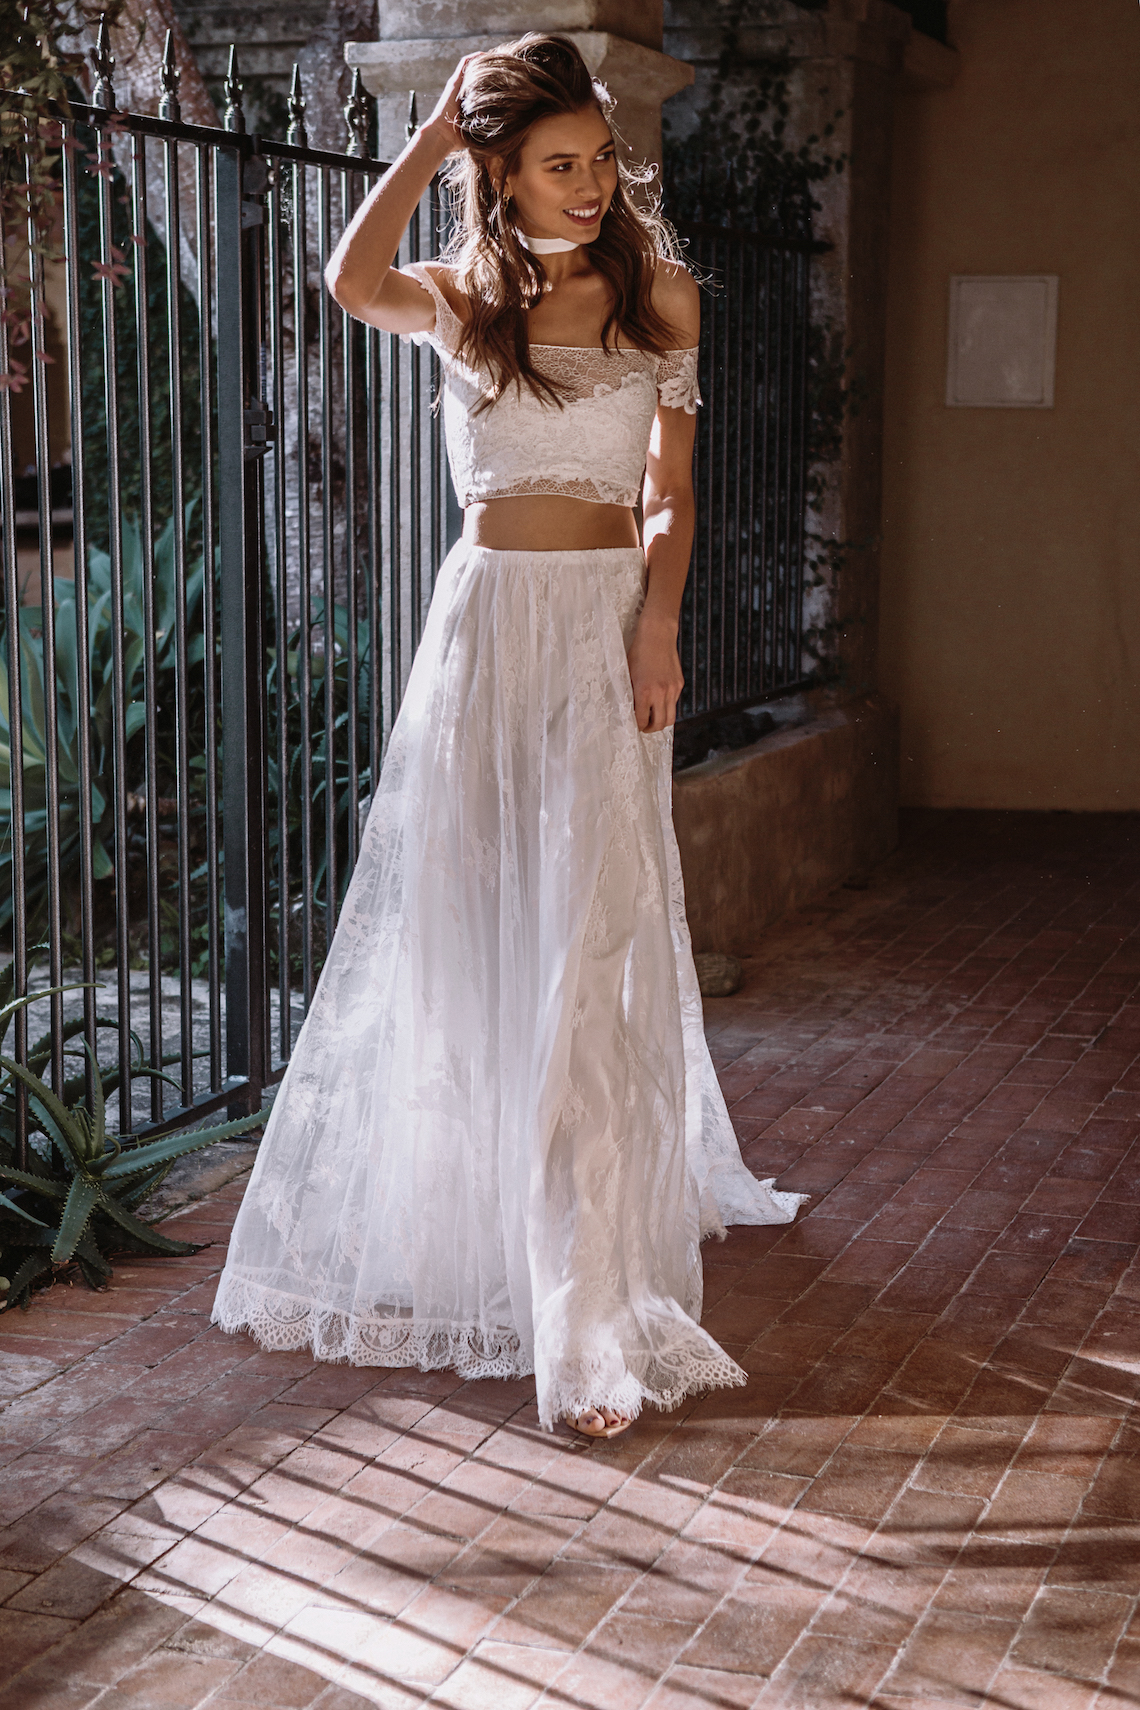 Hey Rebellious Brides, Grace Loves Lace Released A New Collection Just For You! | Perla Gown 2